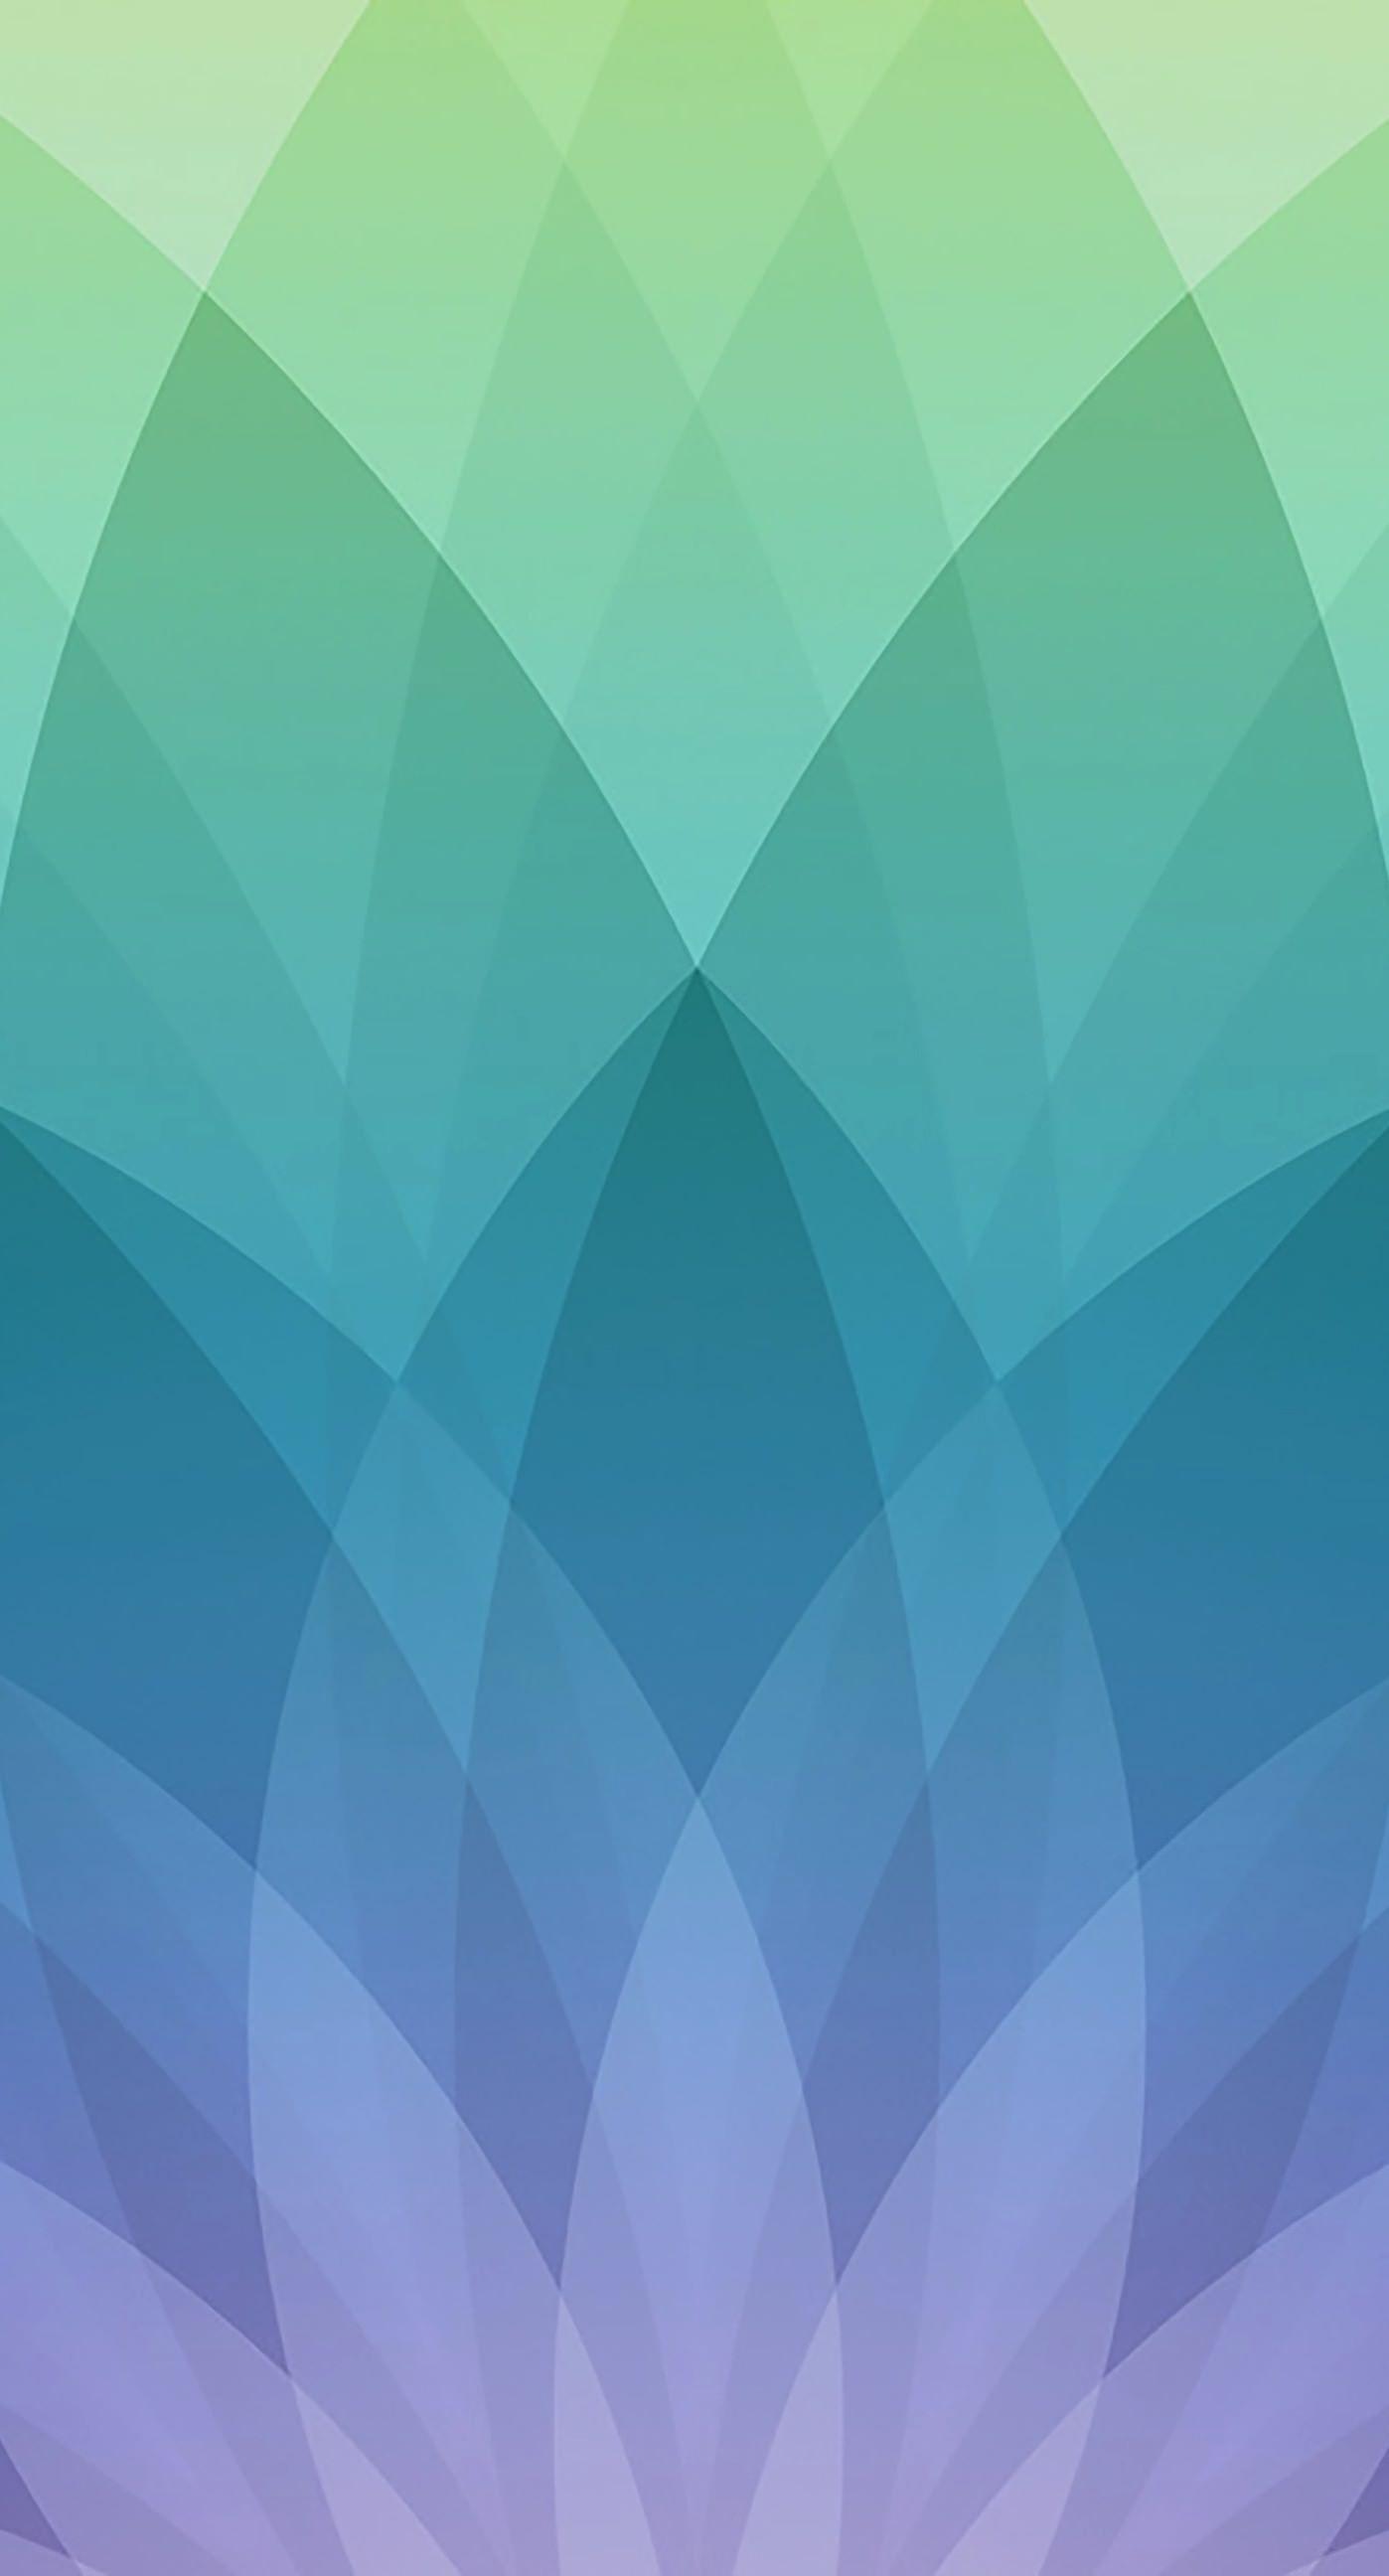 26 Awesome Wallpapers for iPhone 6s/6/5s/5